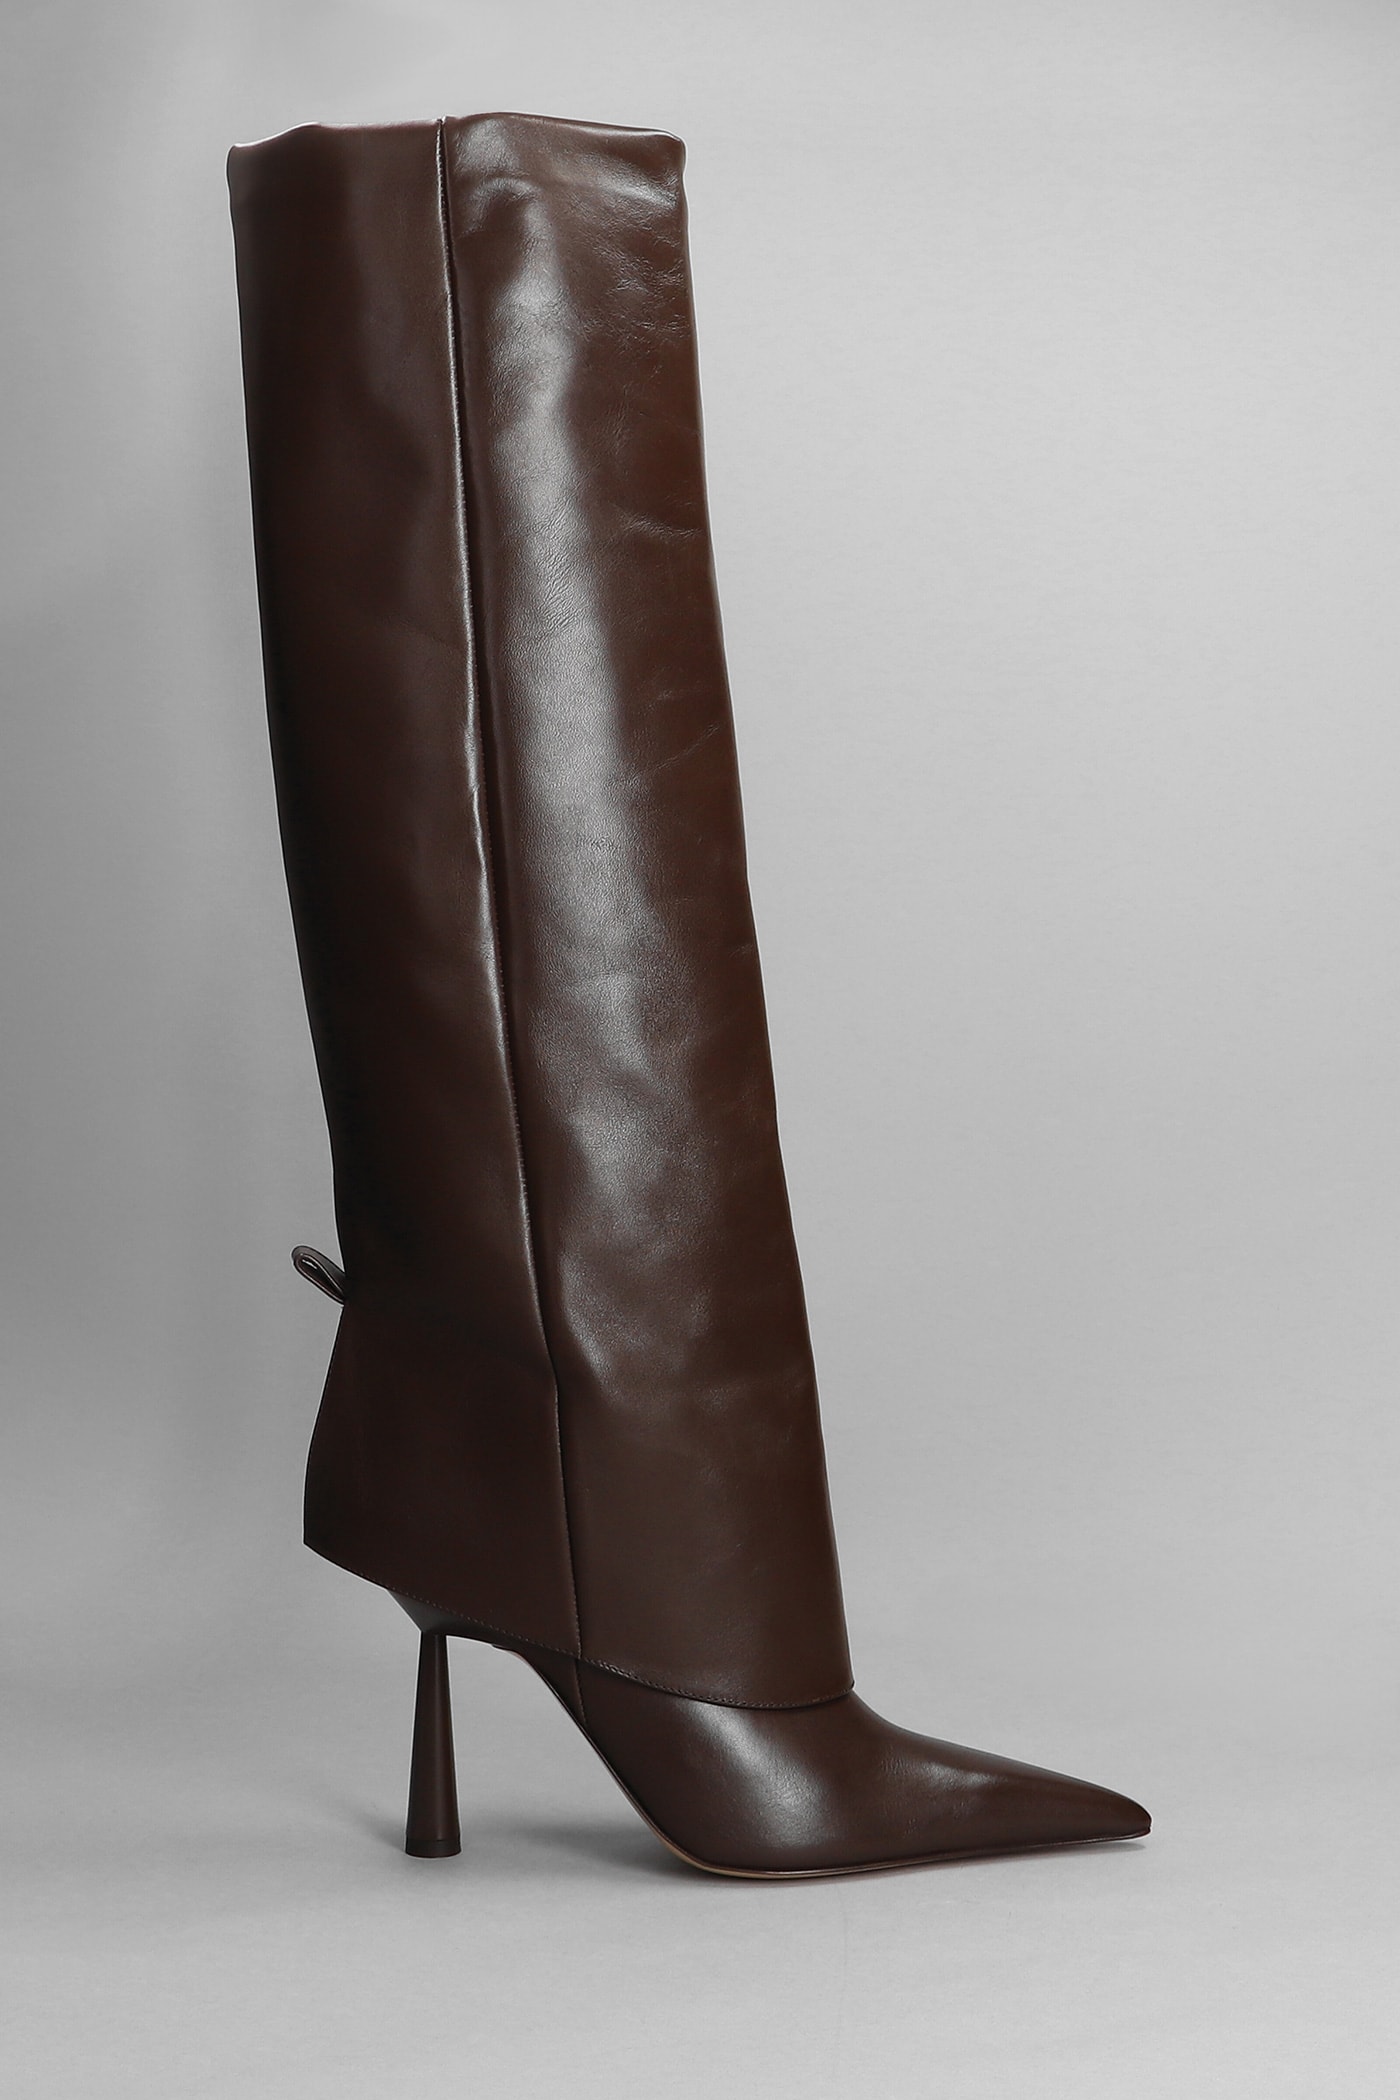 Gia X Rhw Rosie 31 High Heels Boots In Brown Leather